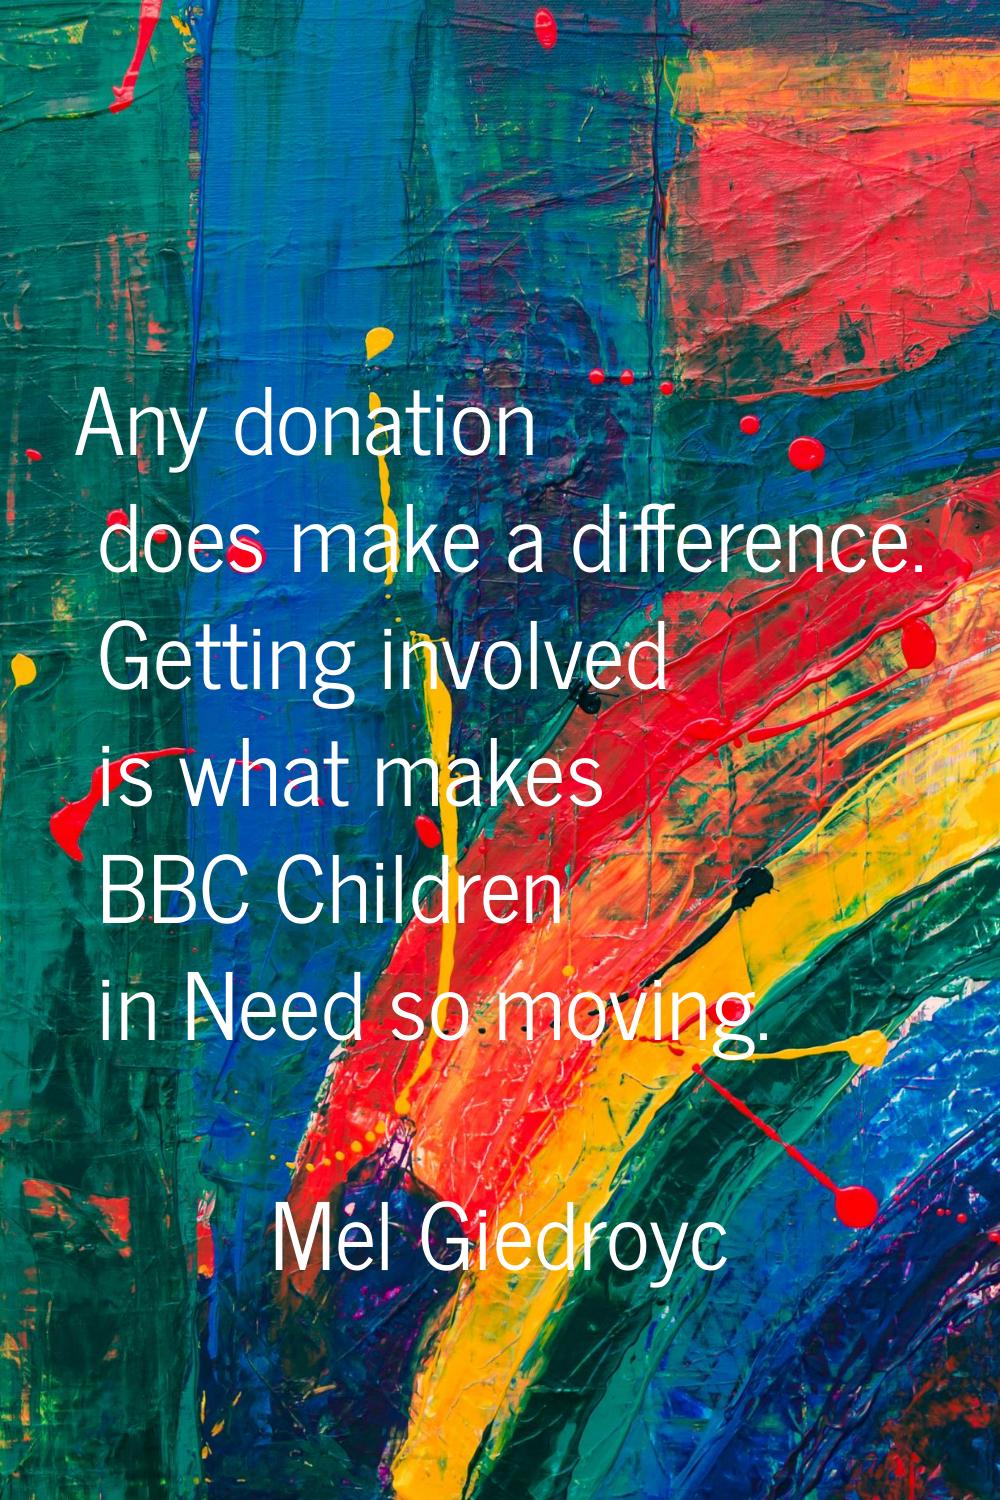 Any donation does make a difference. Getting involved is what makes BBC Children in Need so moving.